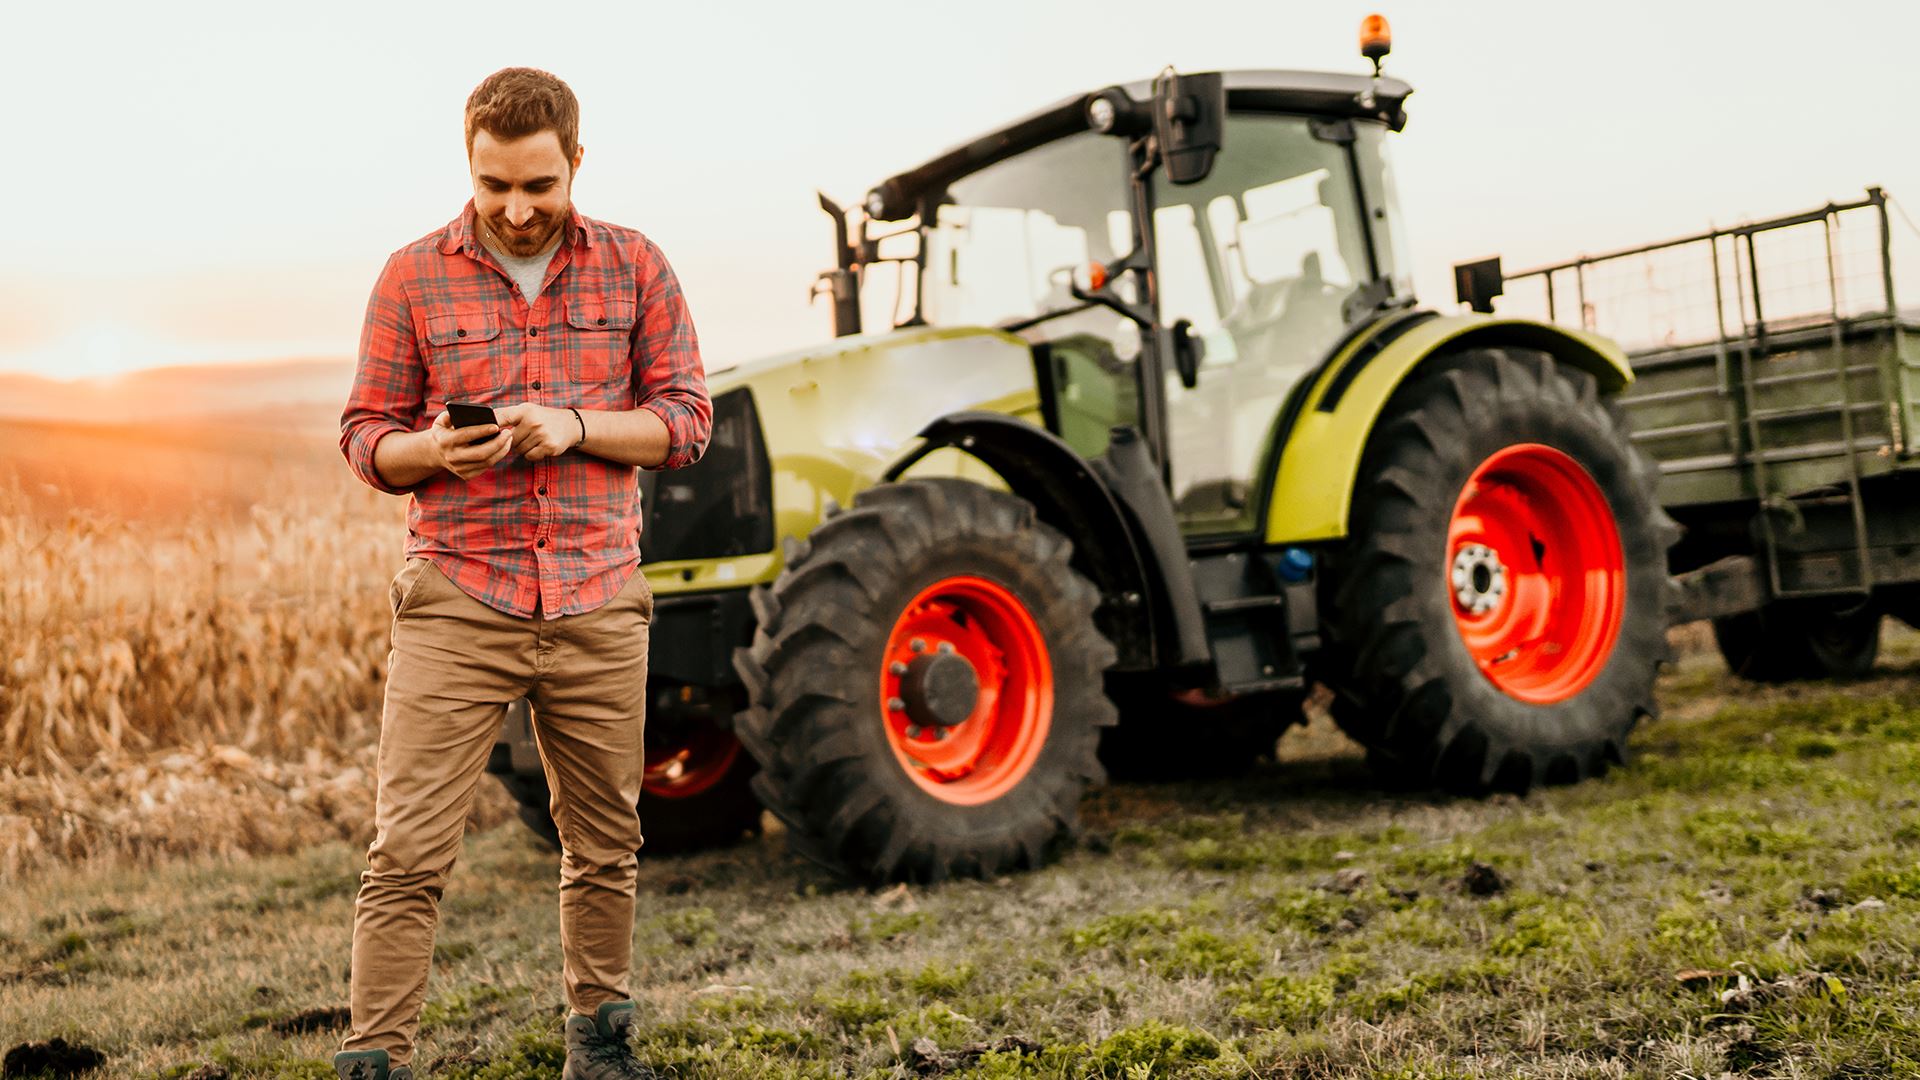 Man on his phone in front of a tractor in a wheat field